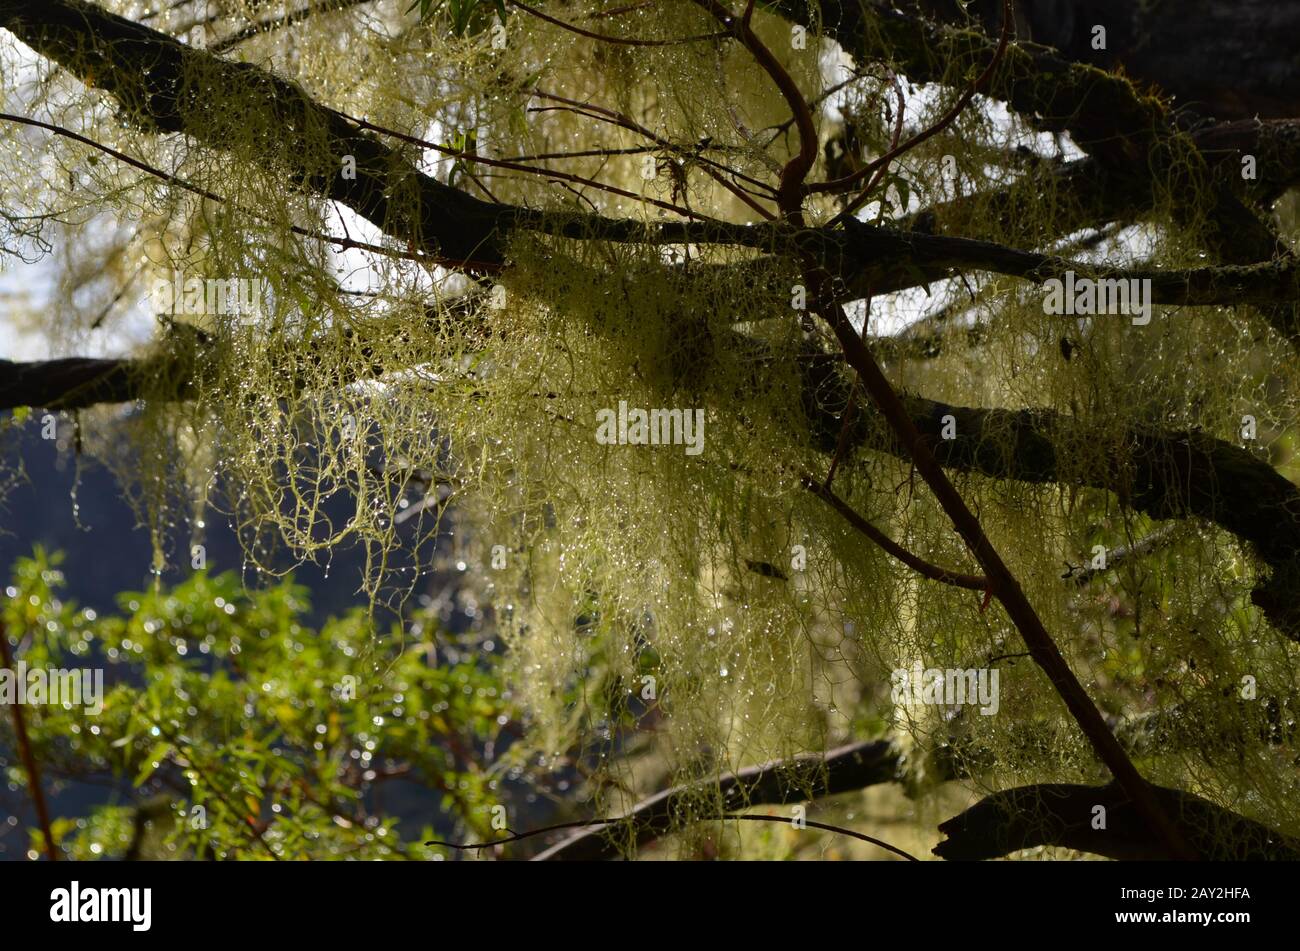 Hanging lichens (Old man's beard) in the montane cloud forest at the slopes of Piton des Neiges, Réunion island, Indian Ocean Stock Photo